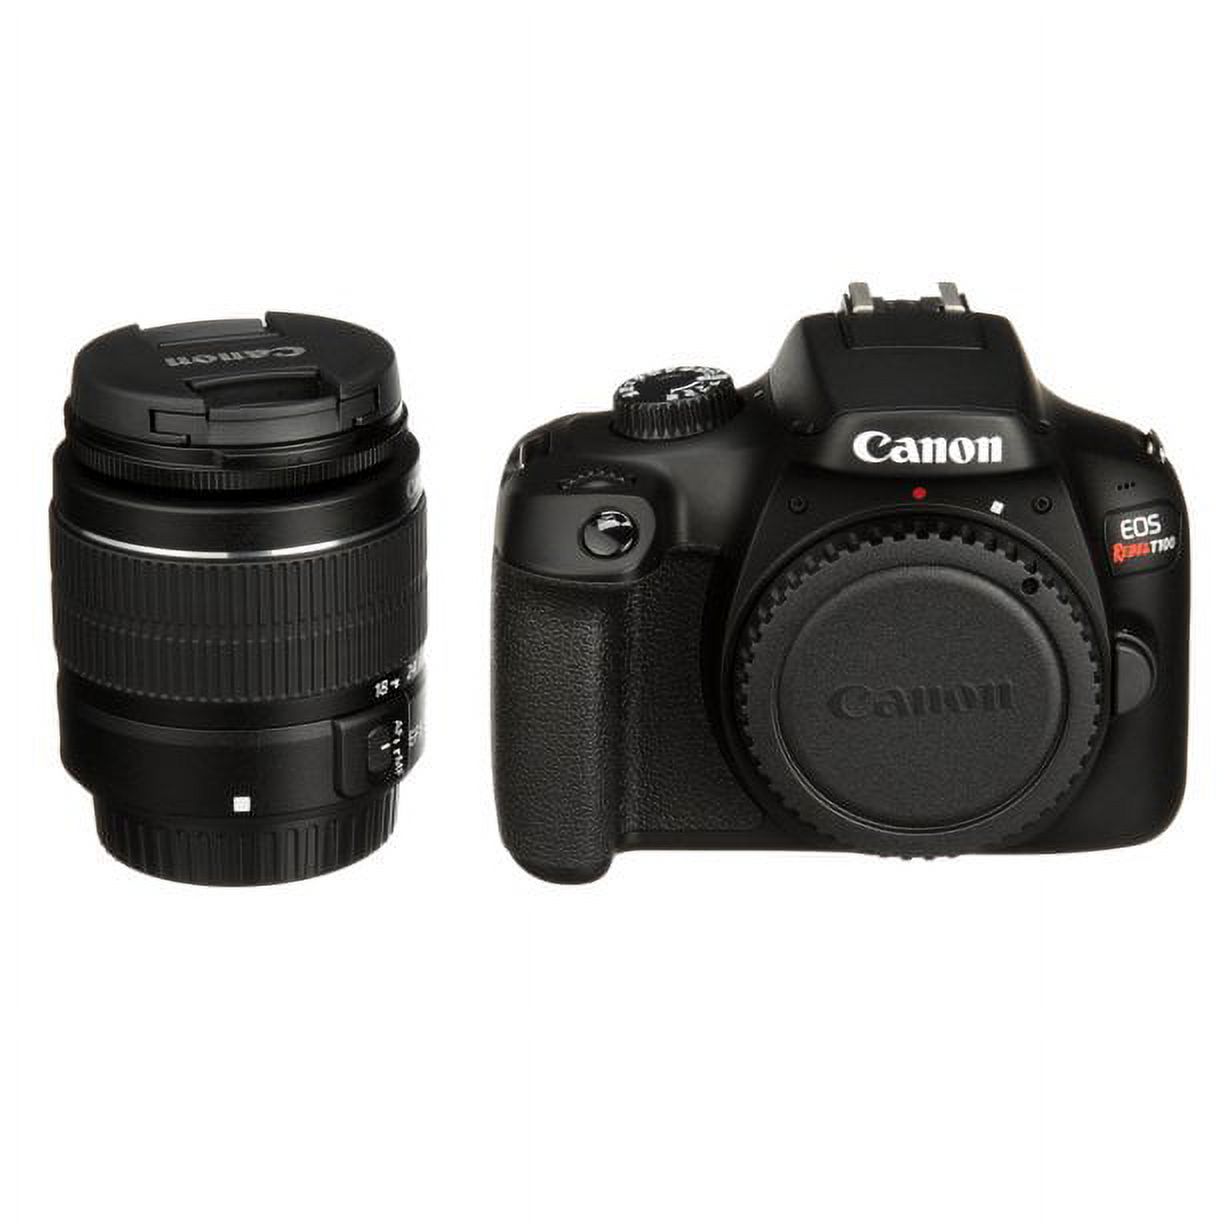 Canon EOS Rebel T100 Digital SLR Camera with 18-55mm Lens Kit + Expo Premium Accessories Bundle,CNT100EP - image 5 of 5